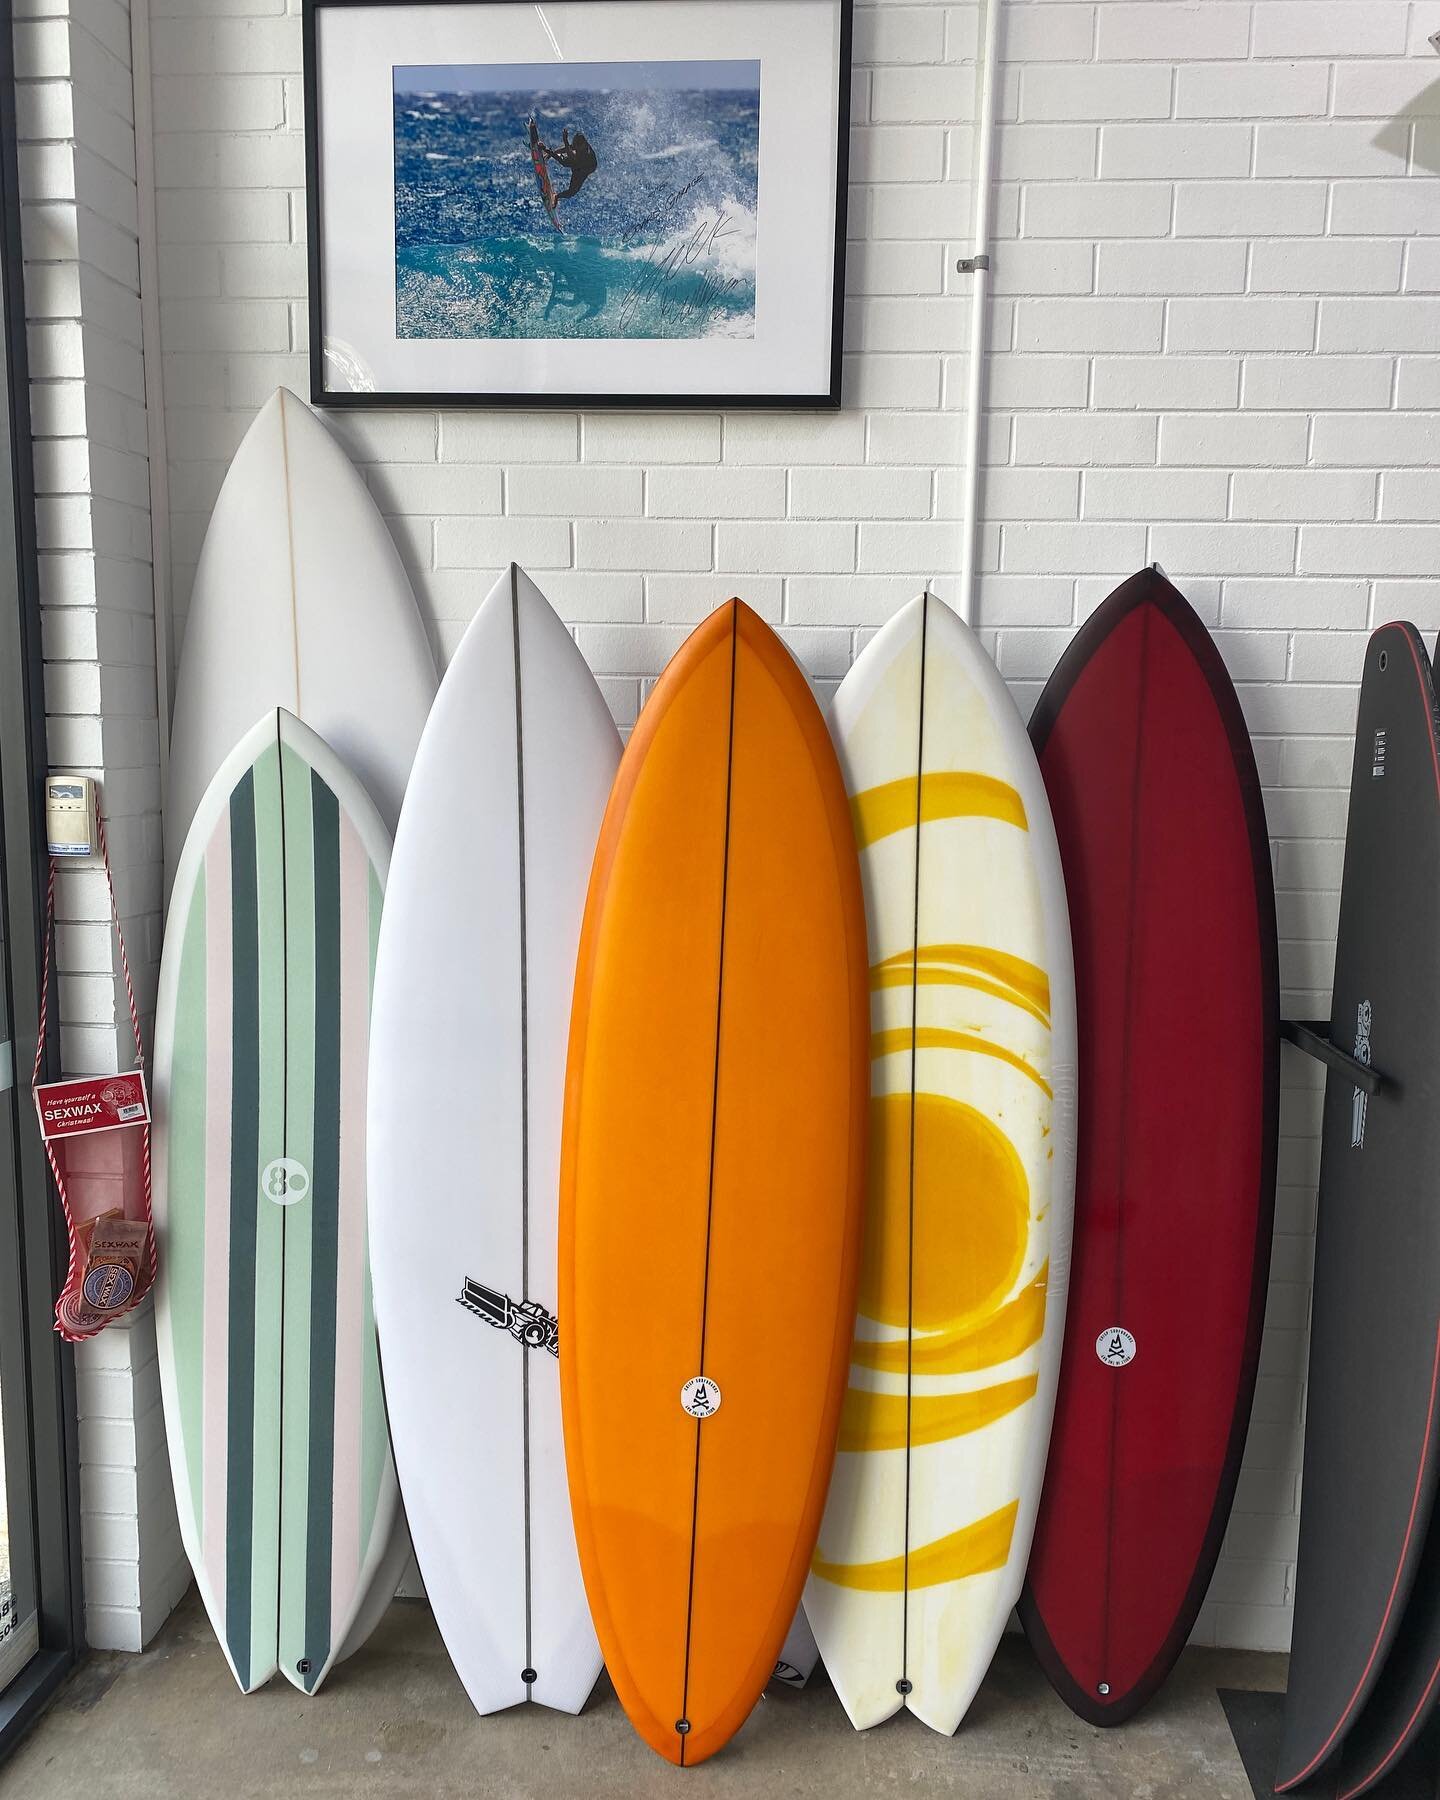 Holidays Season 🤠
We are open everyday this week 9:30-5. 

Come say hello and if you need any surfing goods we are stocked to the brim with all your favourites 🎁